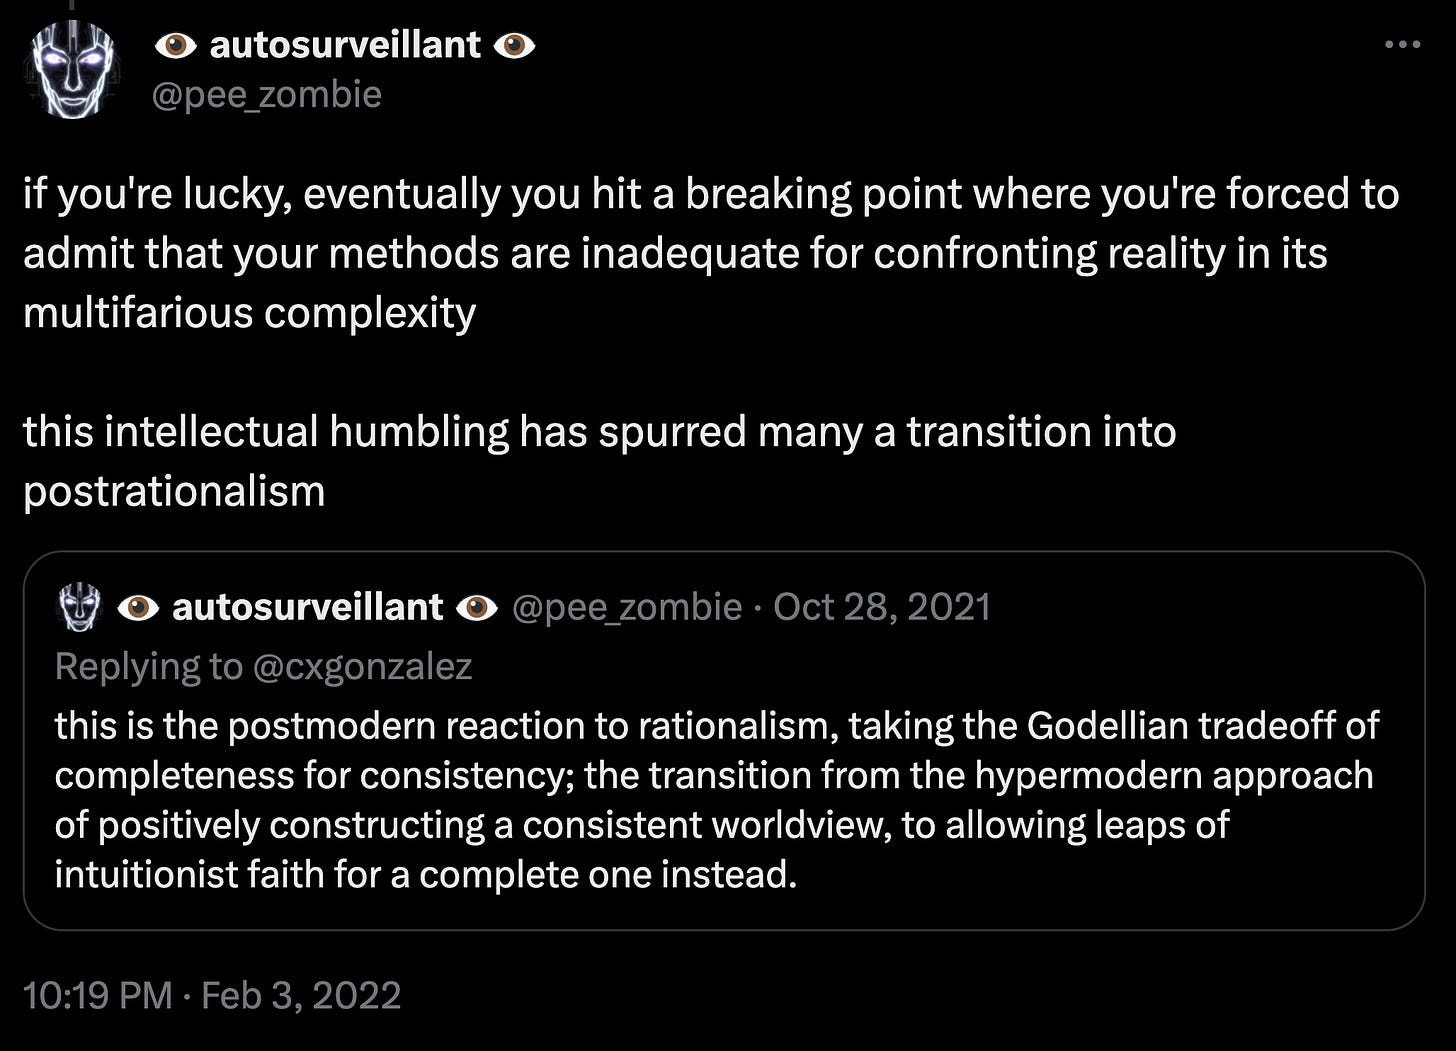 if you're lucky, eventually you hit a breaking point where you're forced to admit that your methods are inadequate for confronting reality in its multifarious complexity  this intellectual humbling has spurred many a transition into postrationalism